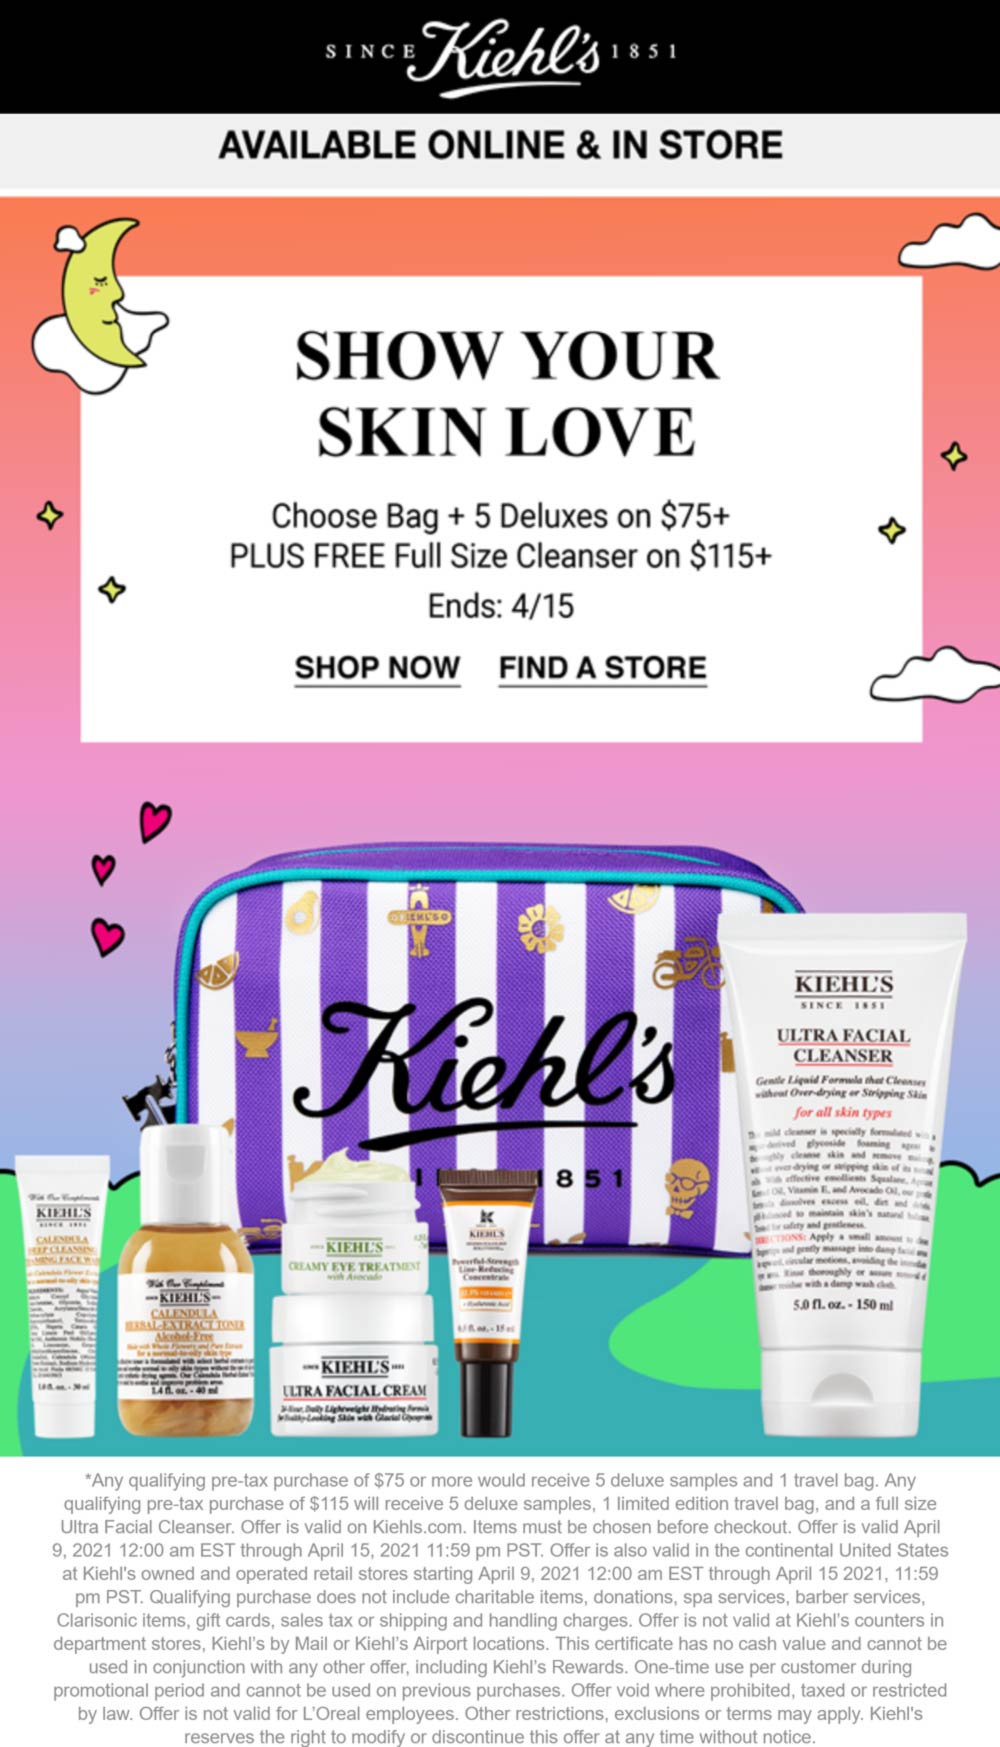 Kiehls stores Coupon  Free full size + 5 deluxes + travel bag on $115 at Kiehls, ditto online #kiehls 